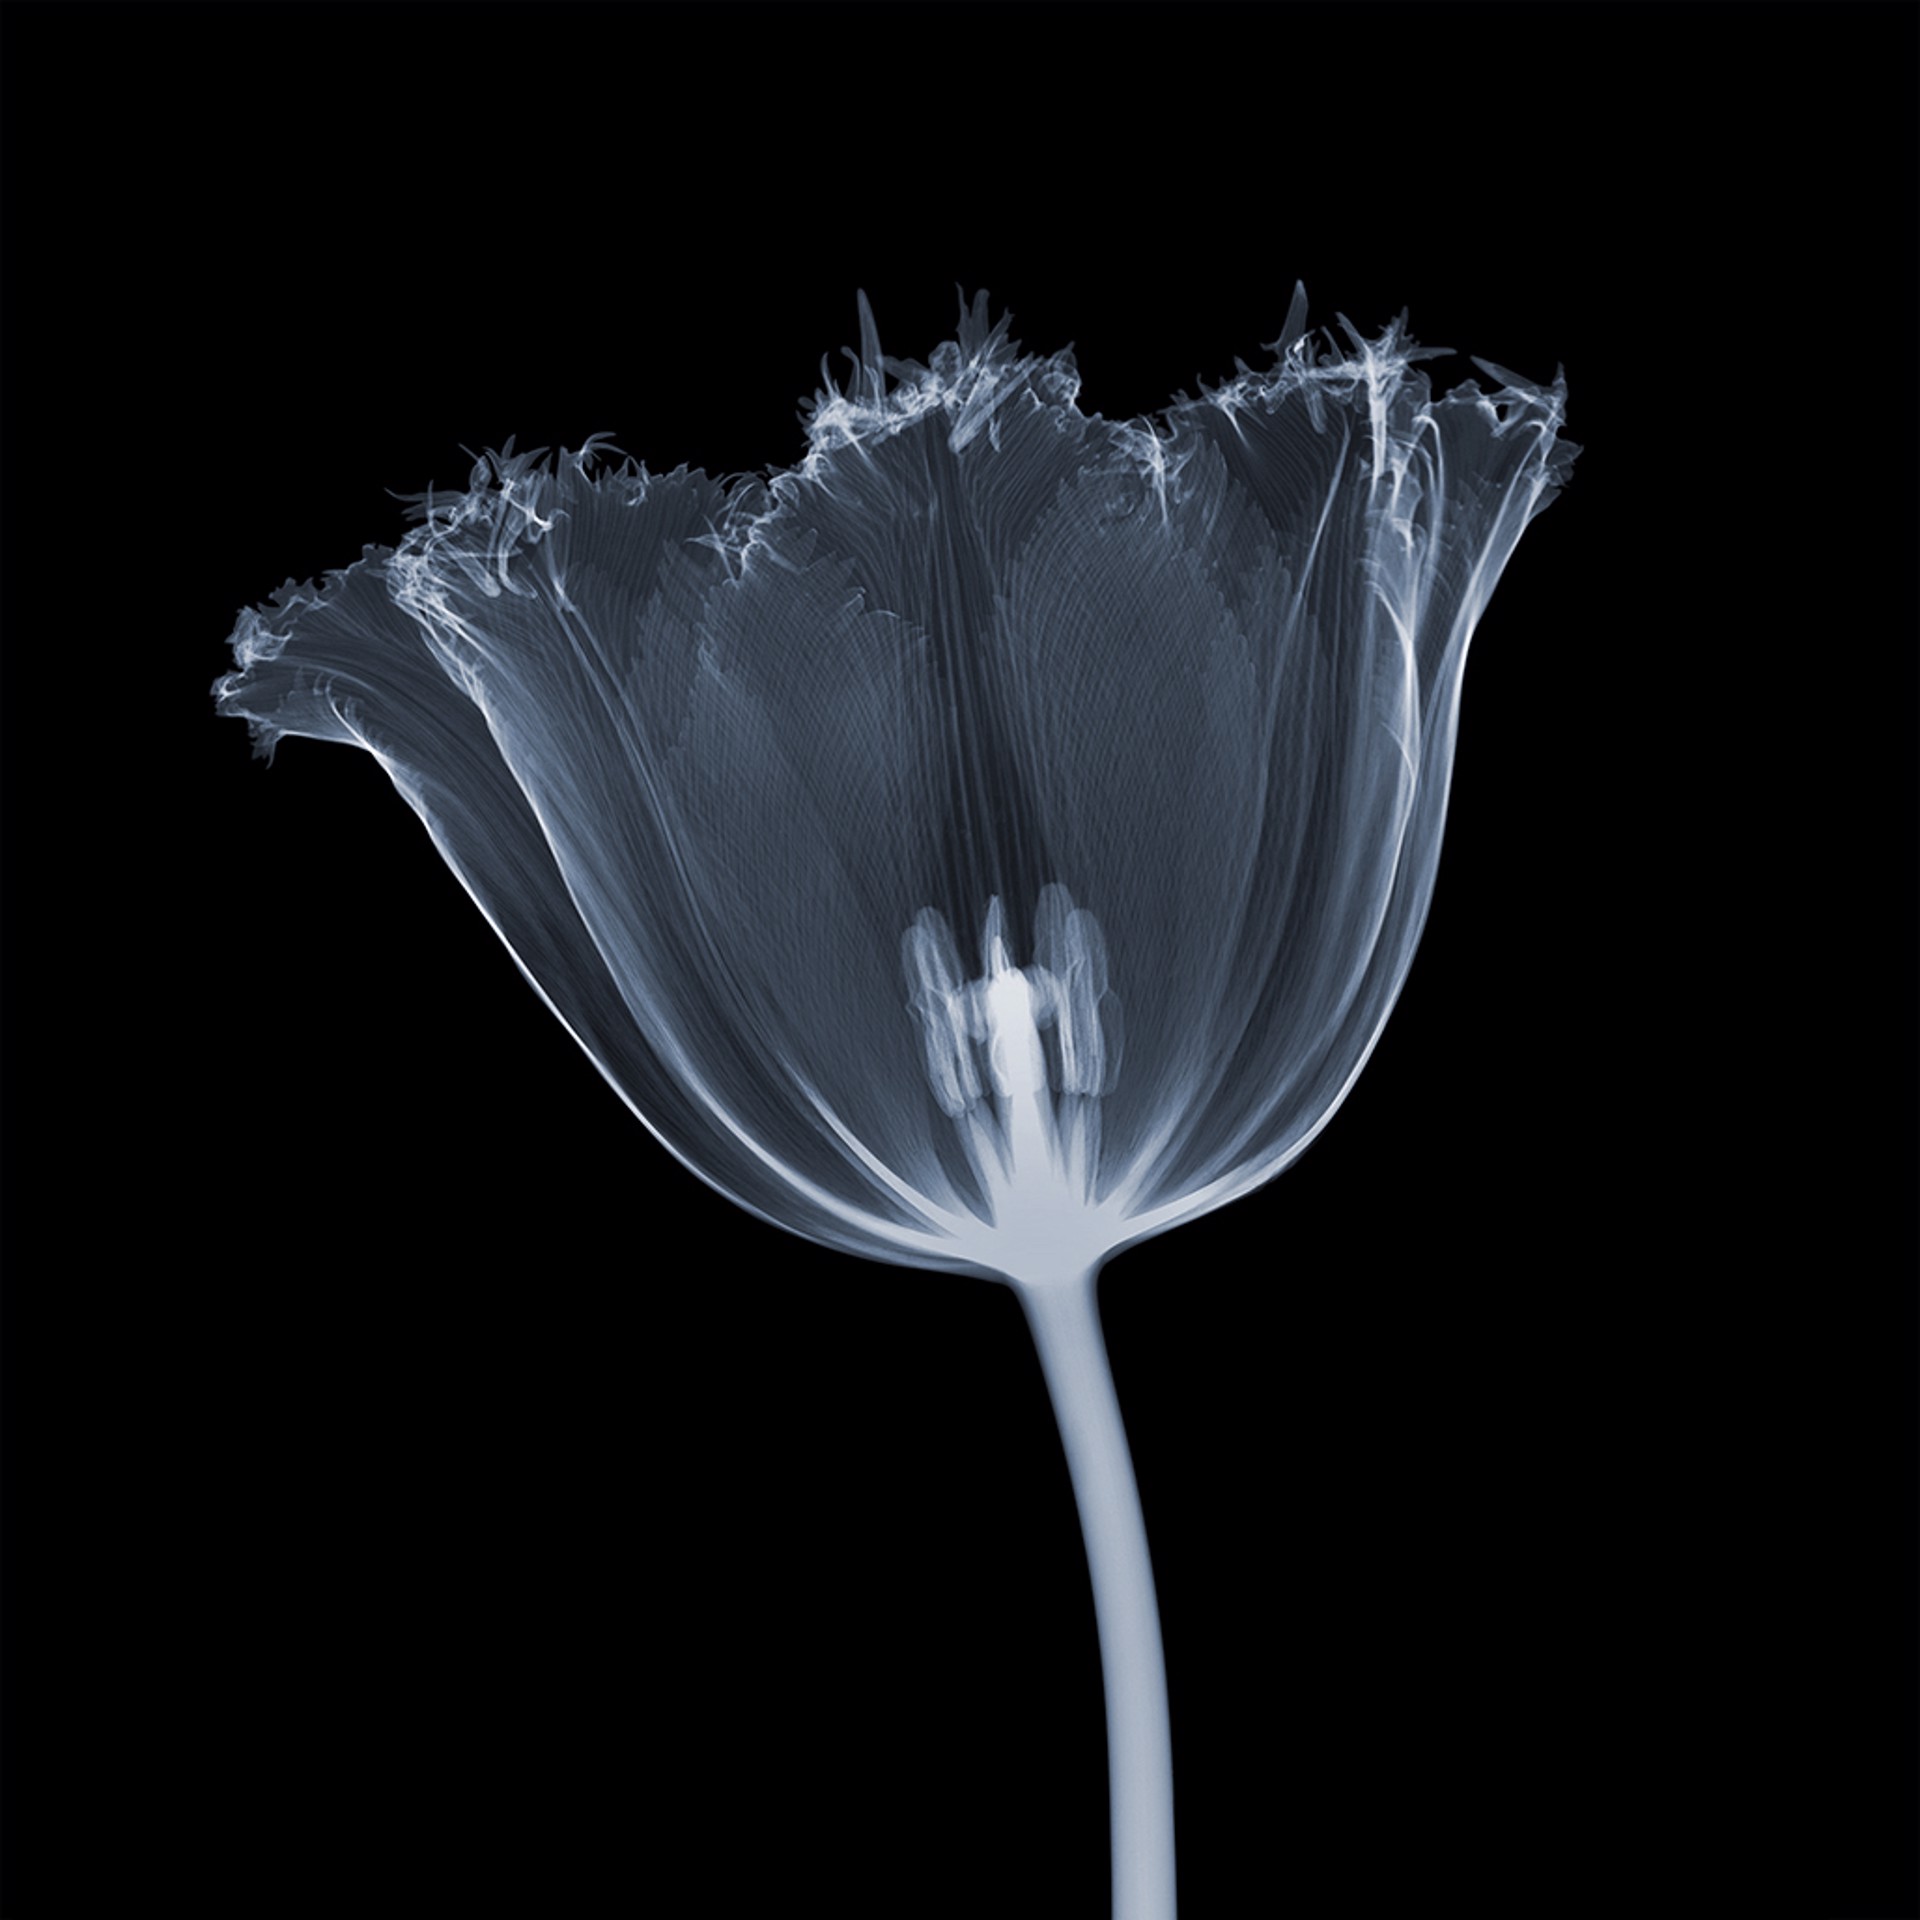 Serrated Tulip by Nick Veasey